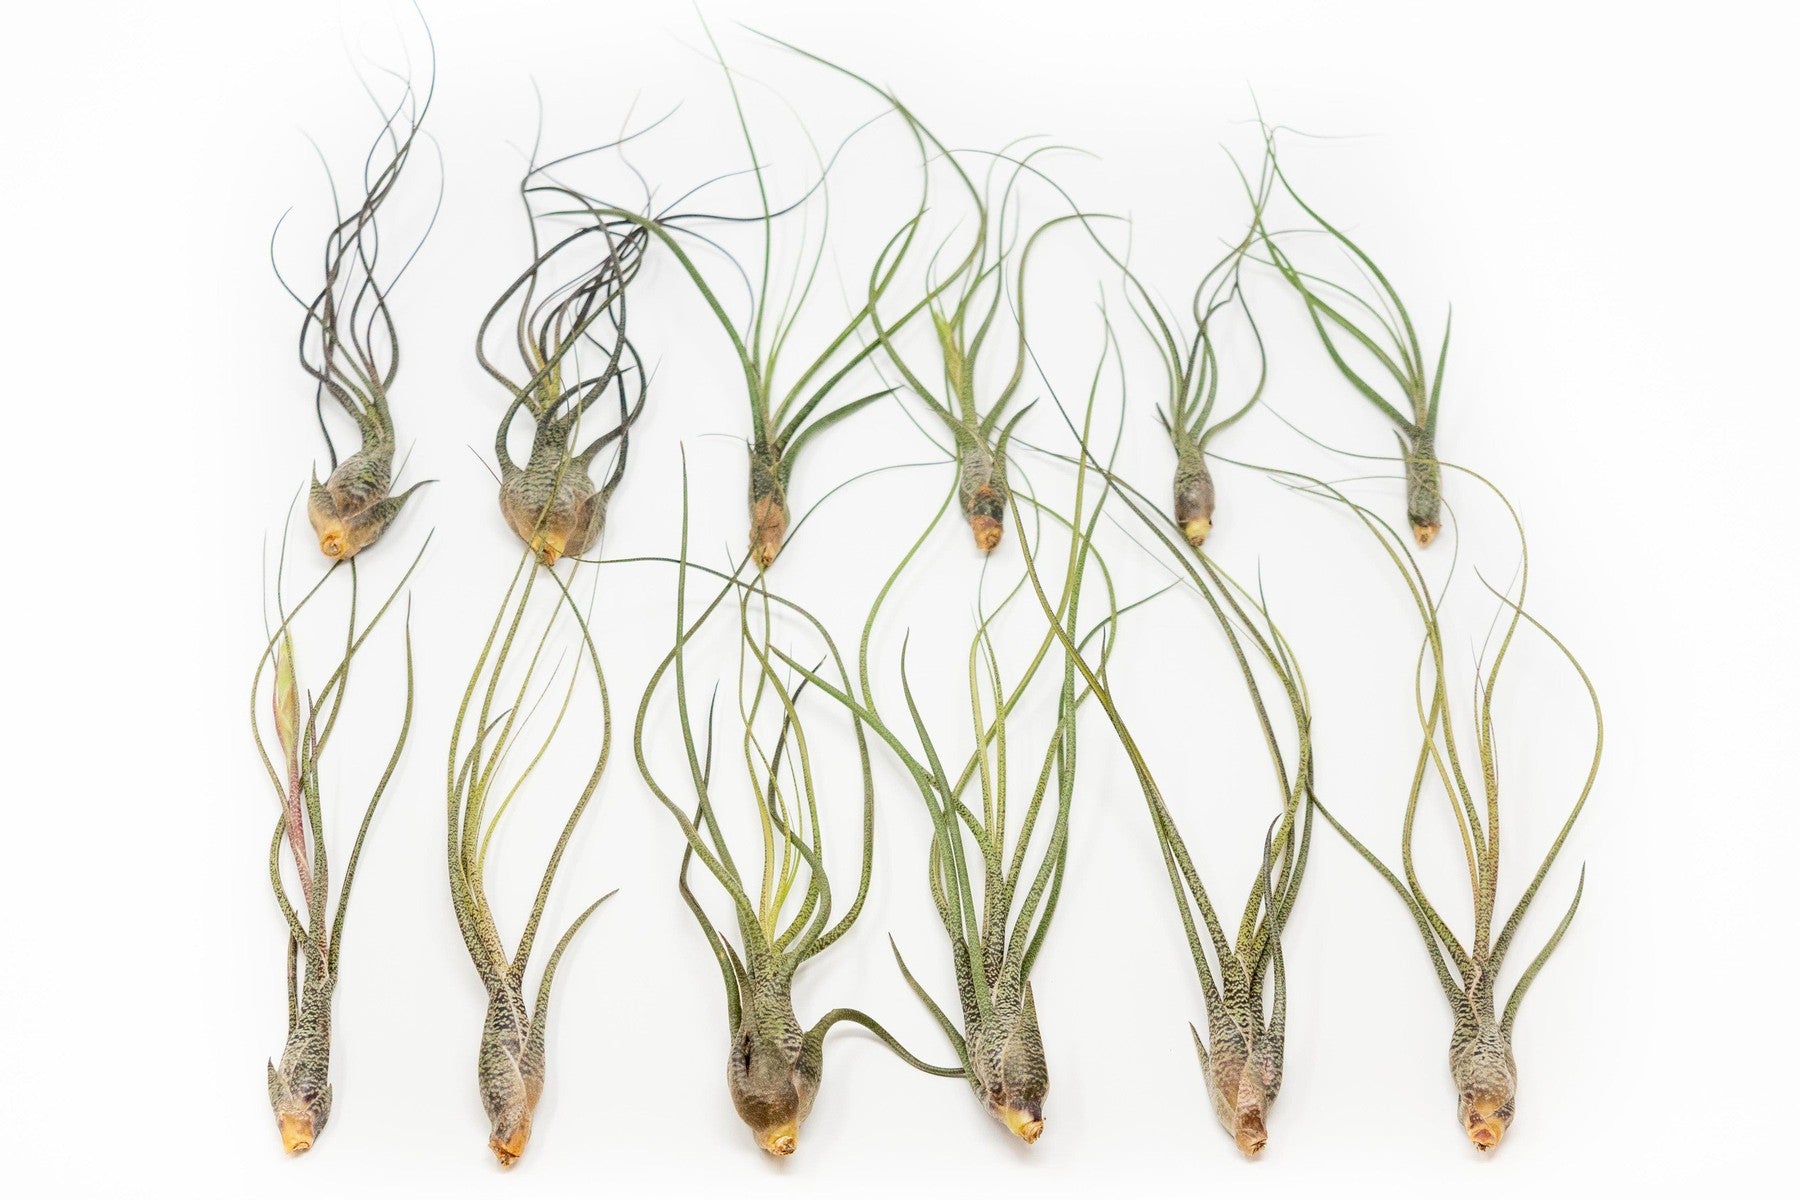 SALE - Large Tillandsia Butzii Air Plants - Set of 10 or 20 Air Plants - 40% Off-airplant-The Succulent Source